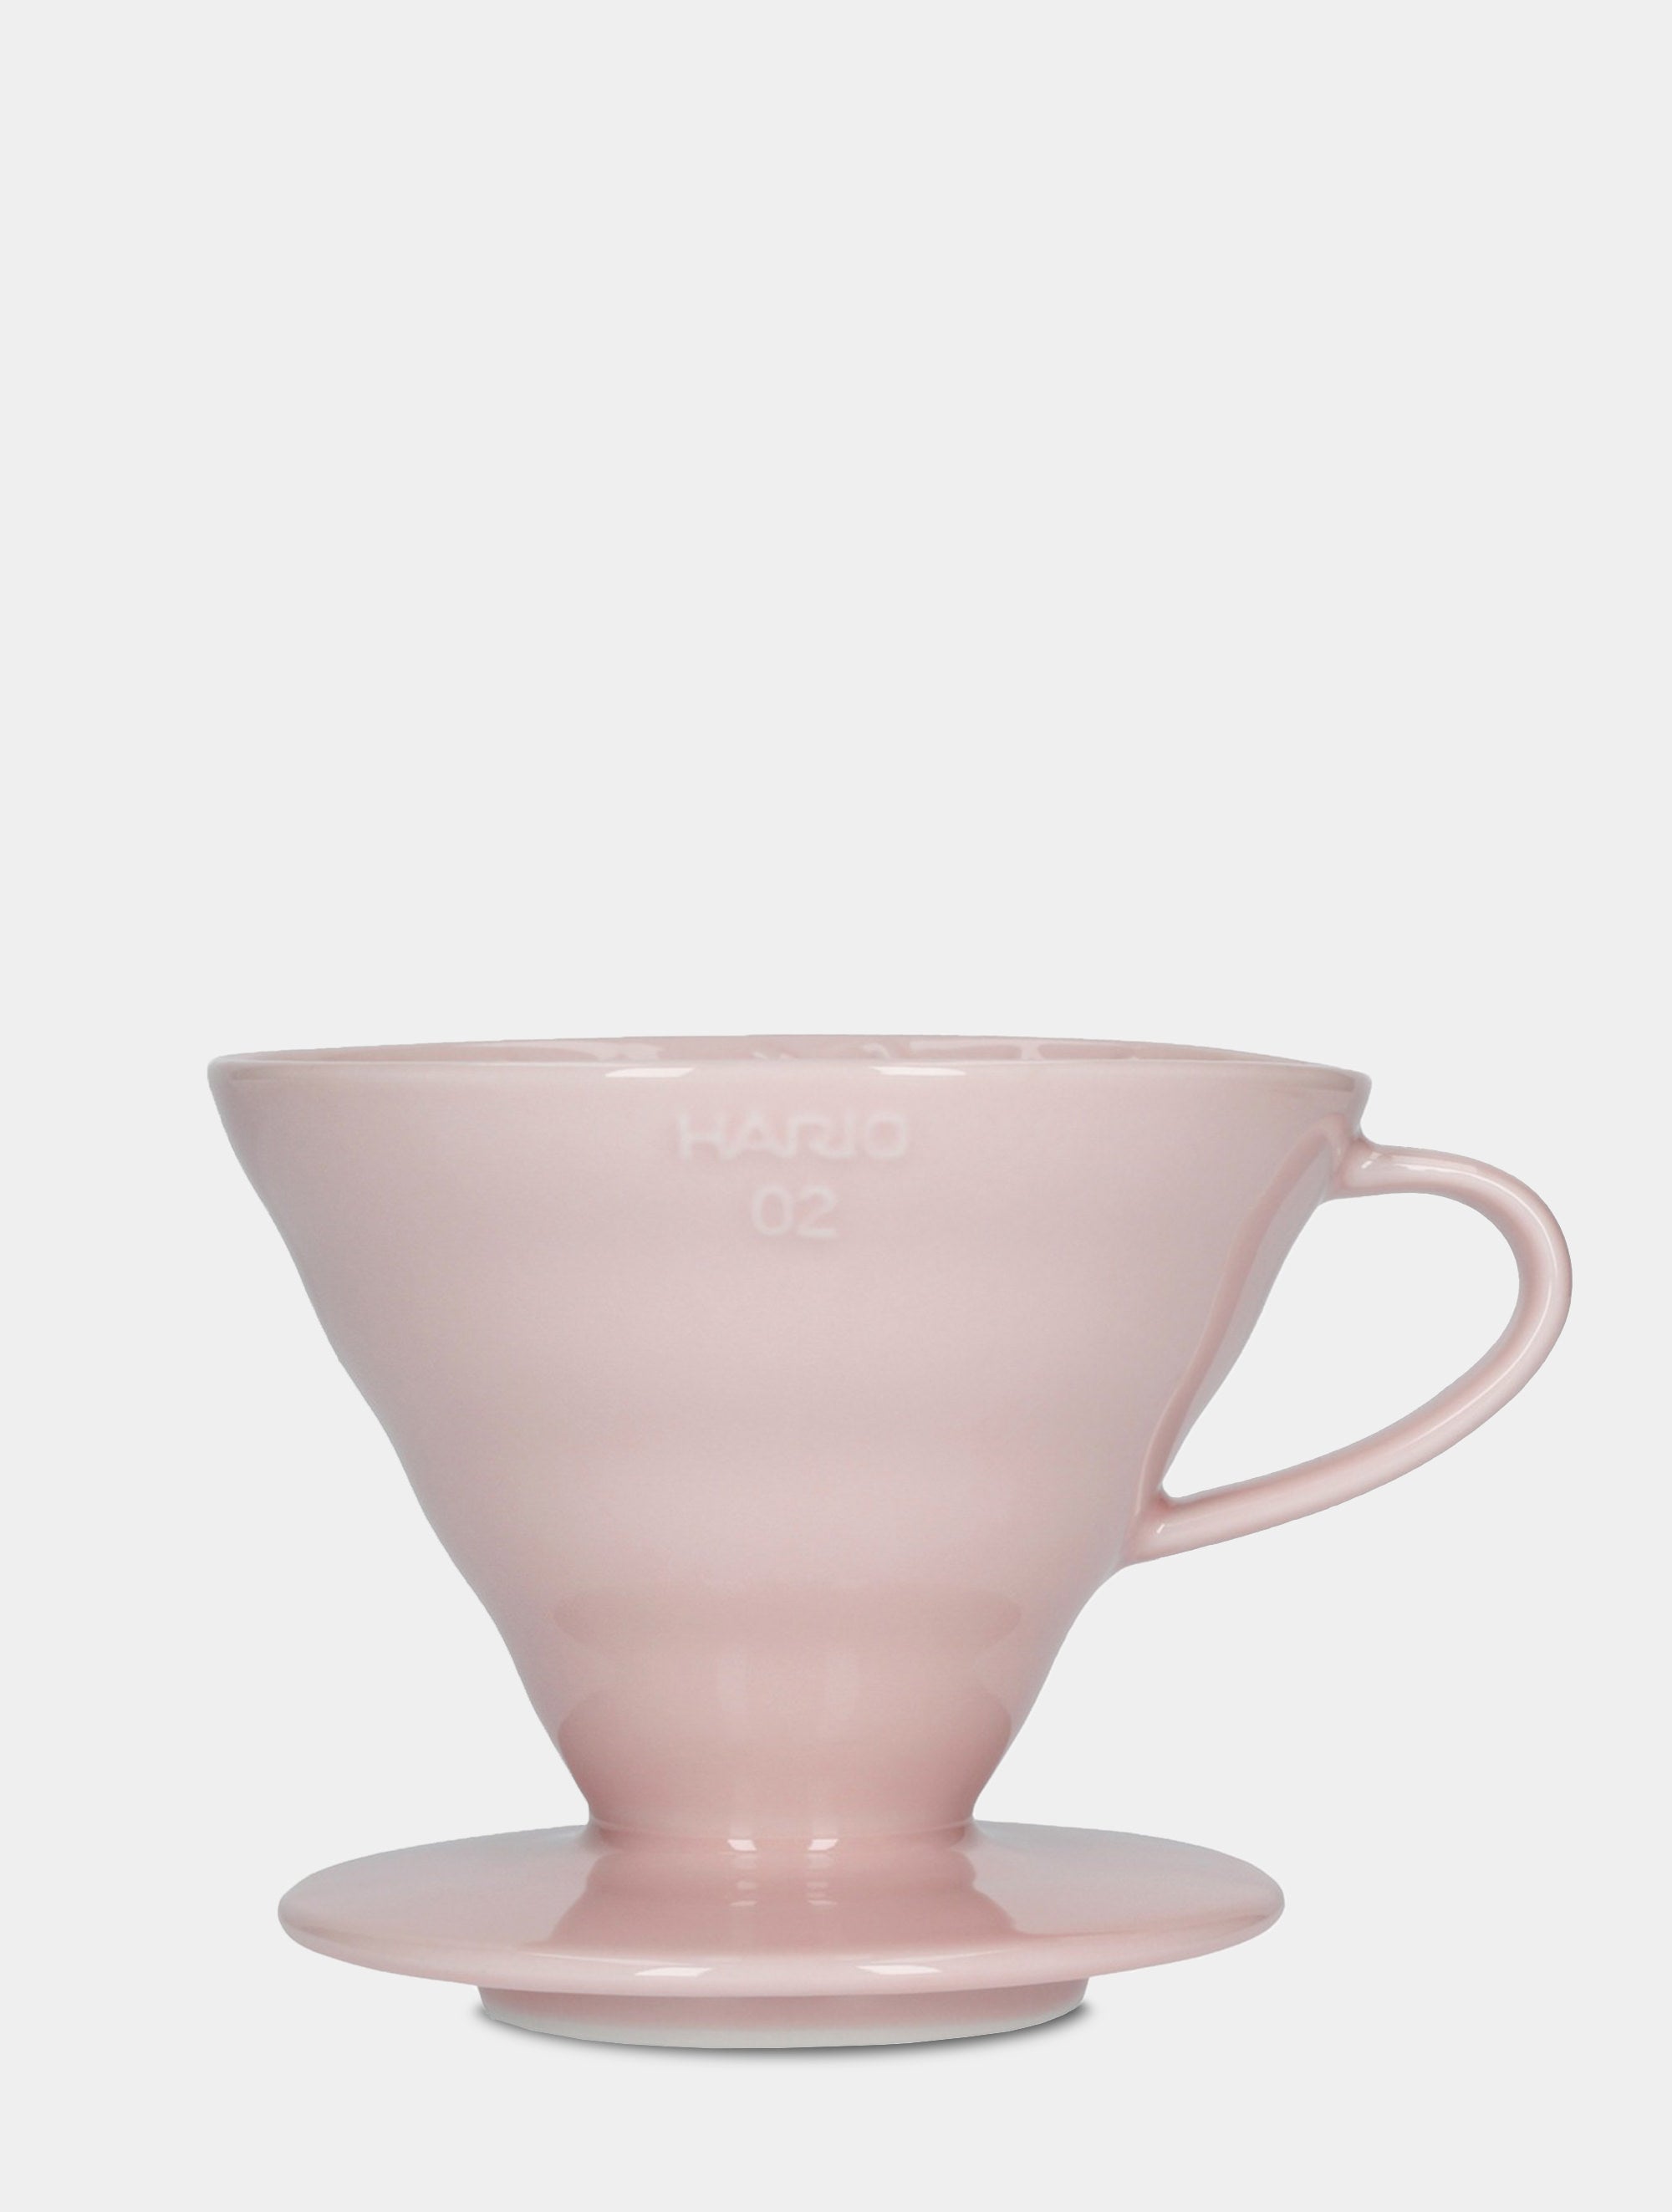 V60 Coffee Dripper 'Colour Edition' pink